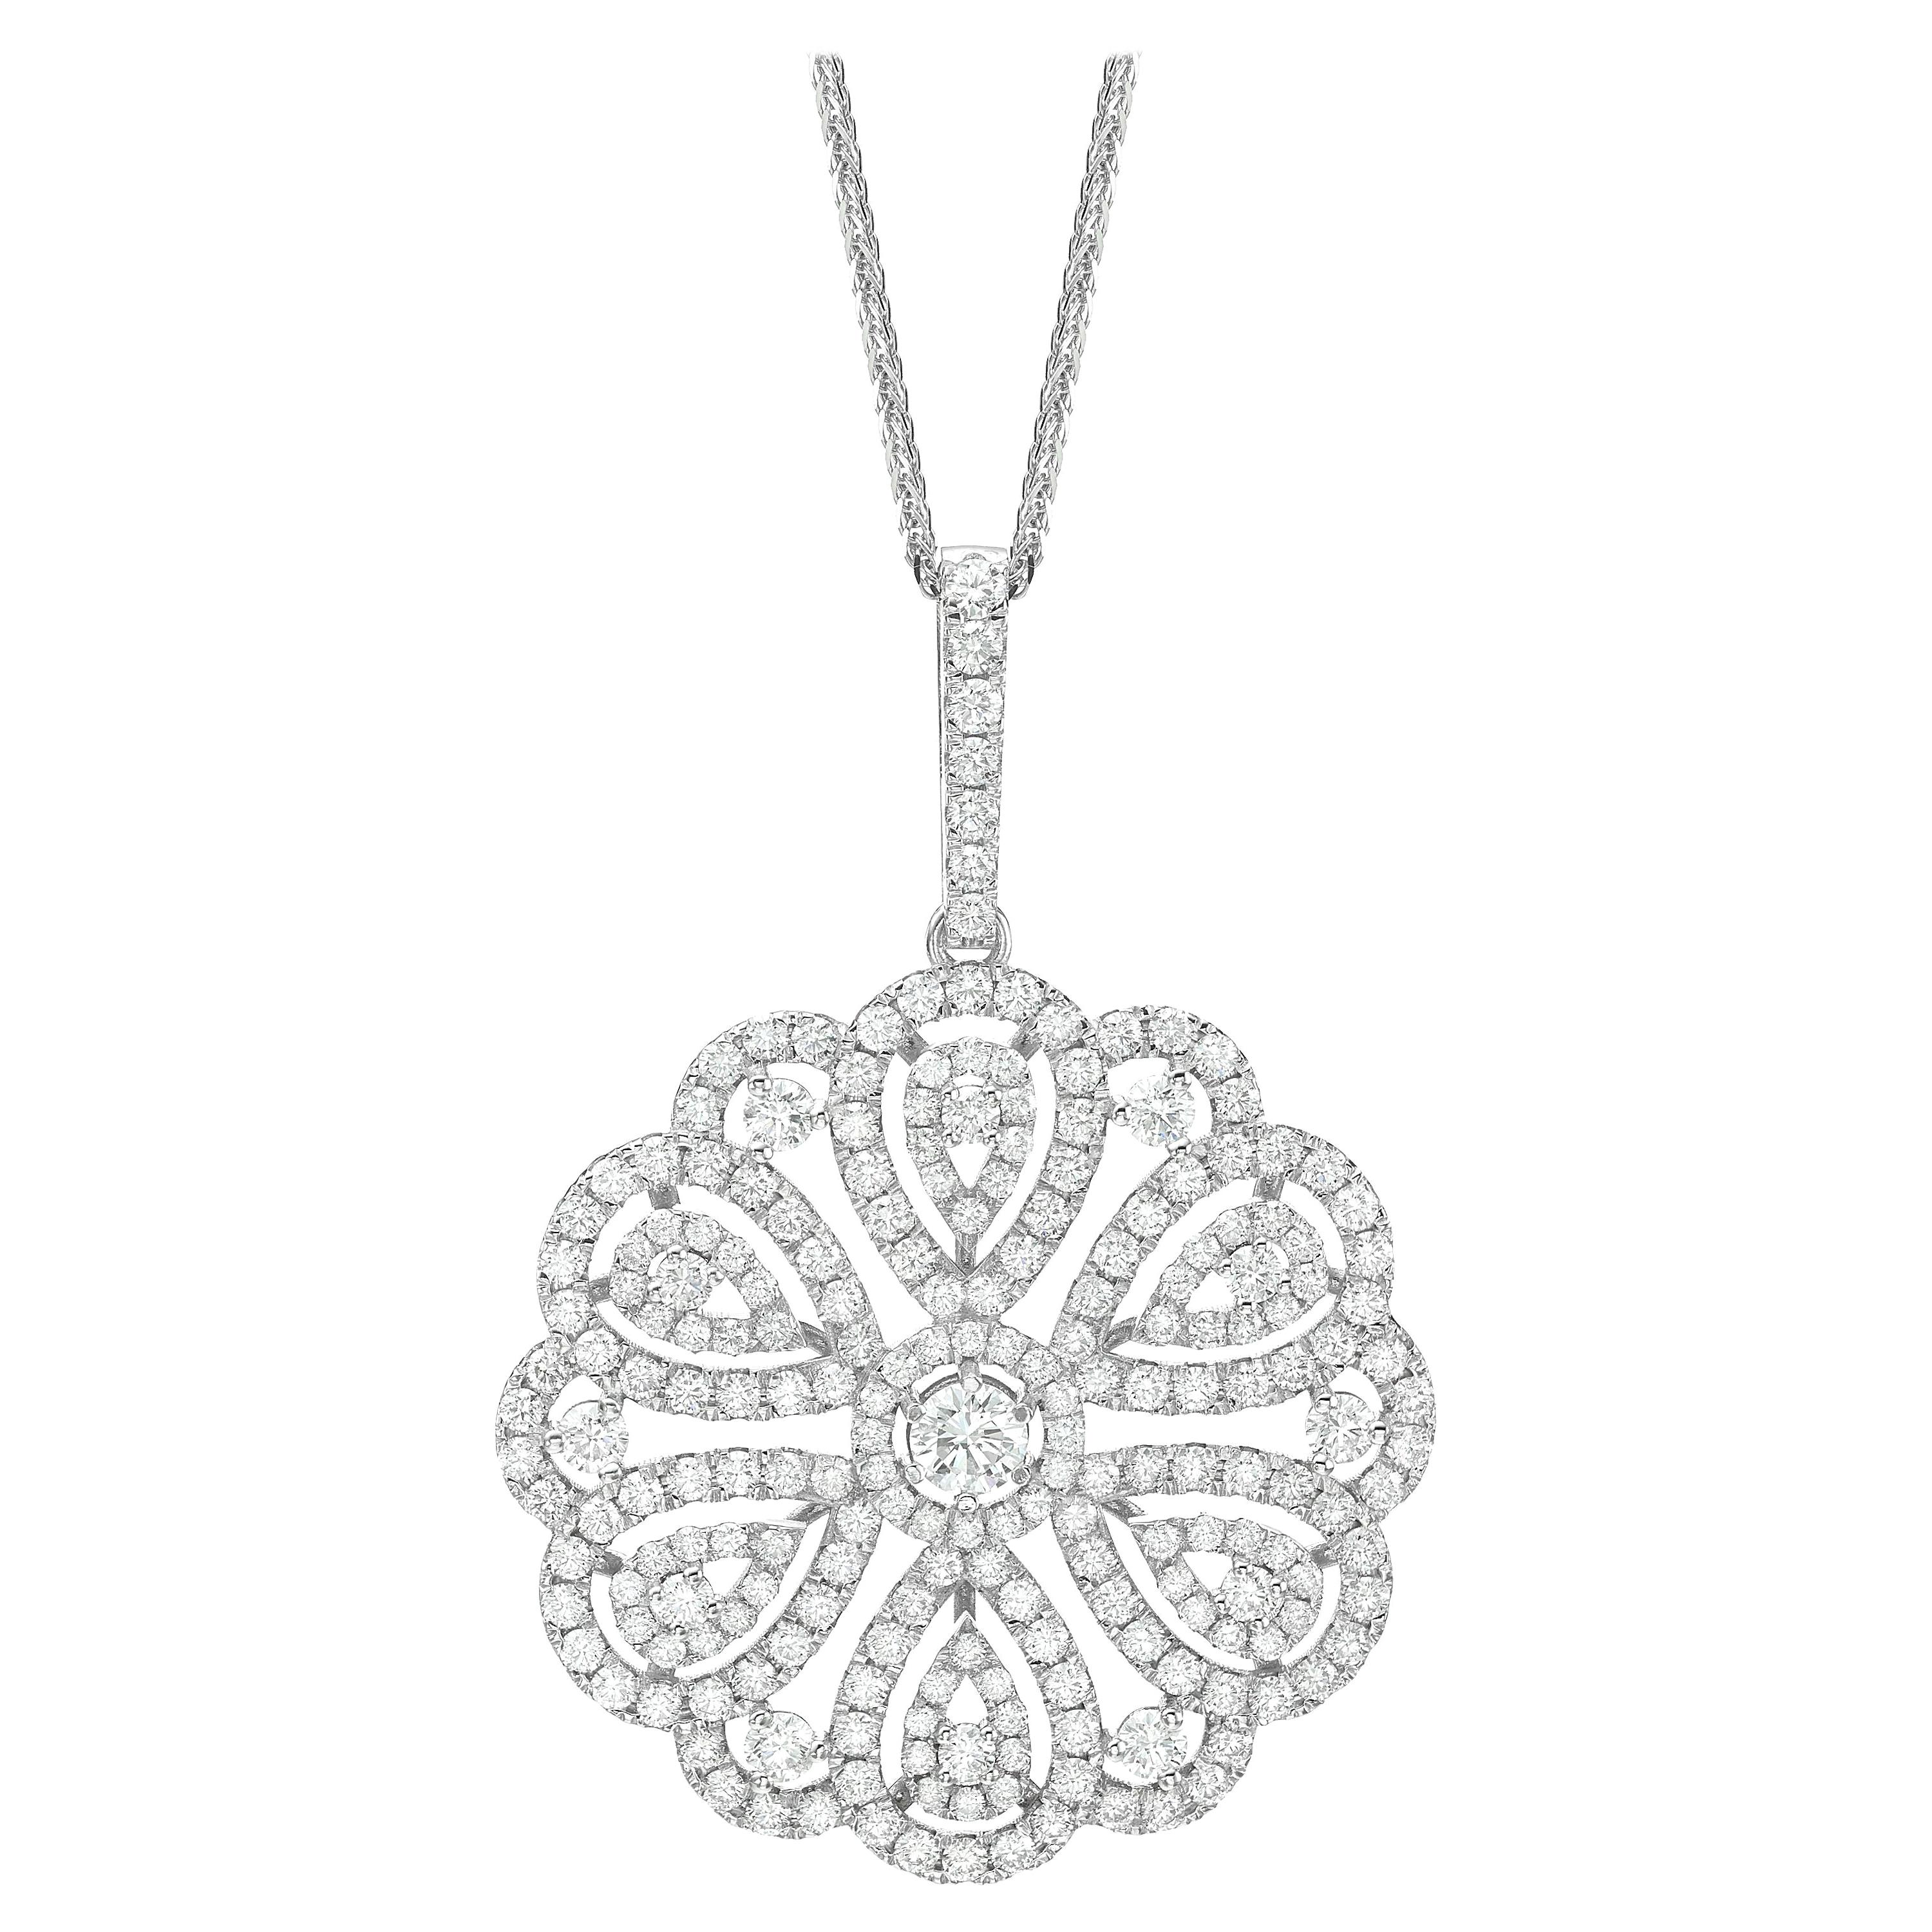 7.52 Carat Round Diamond Cluster Pendant with 18K Gold  Necklace